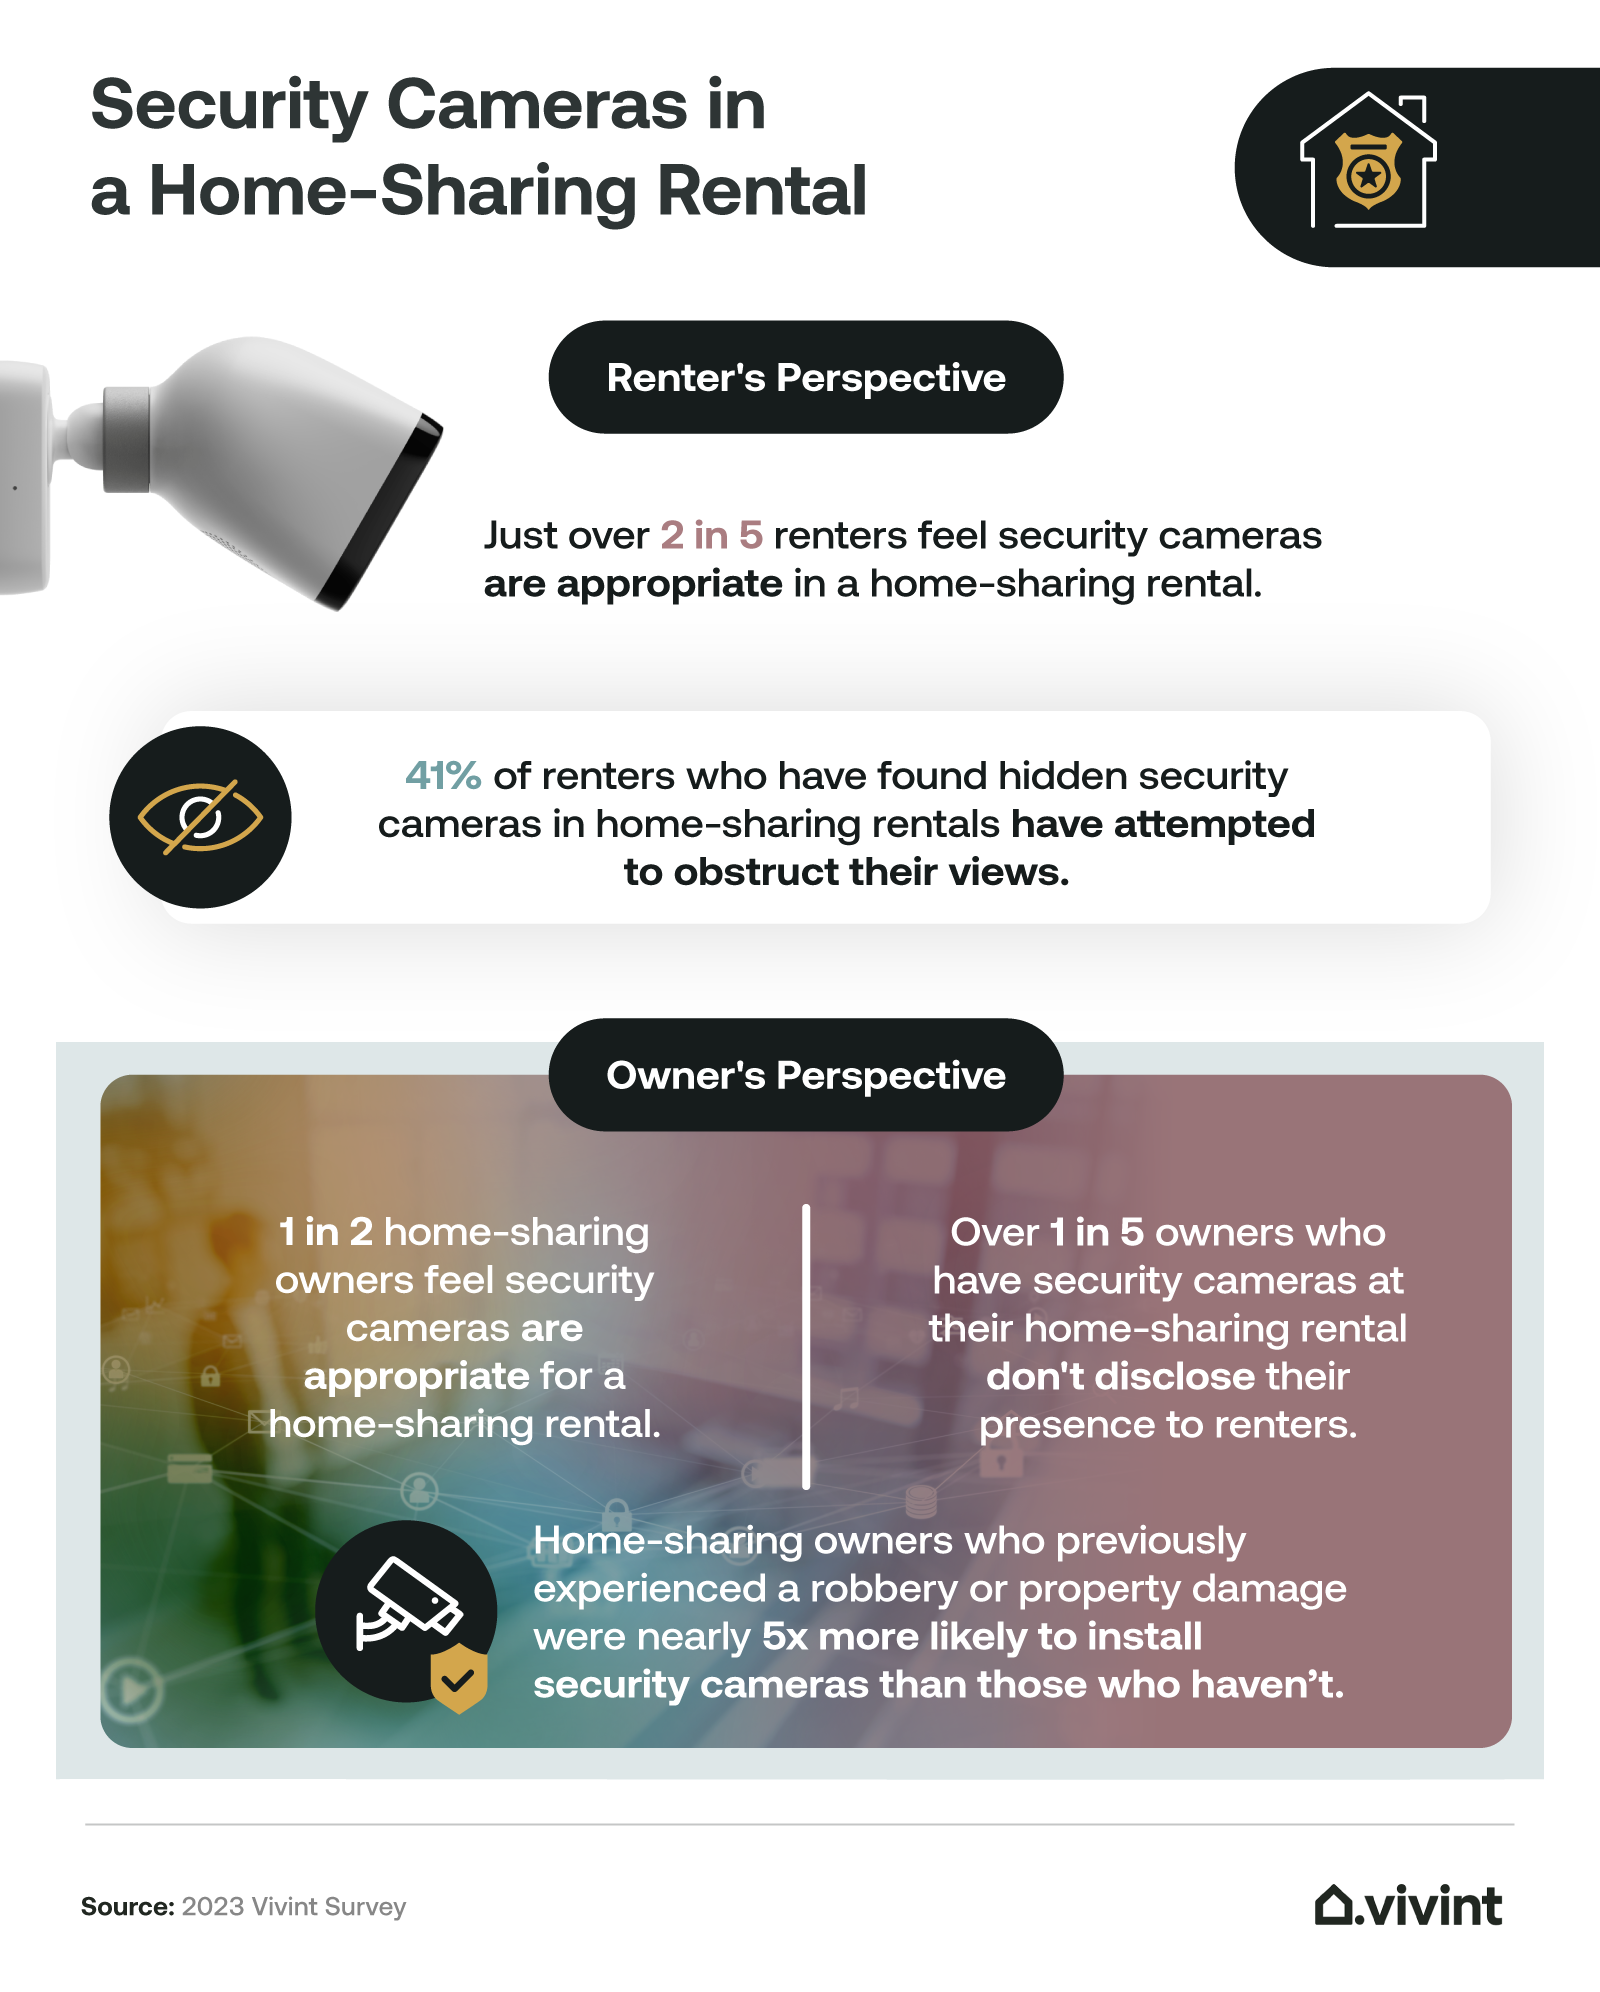 Information about how many rentals have security cameras.